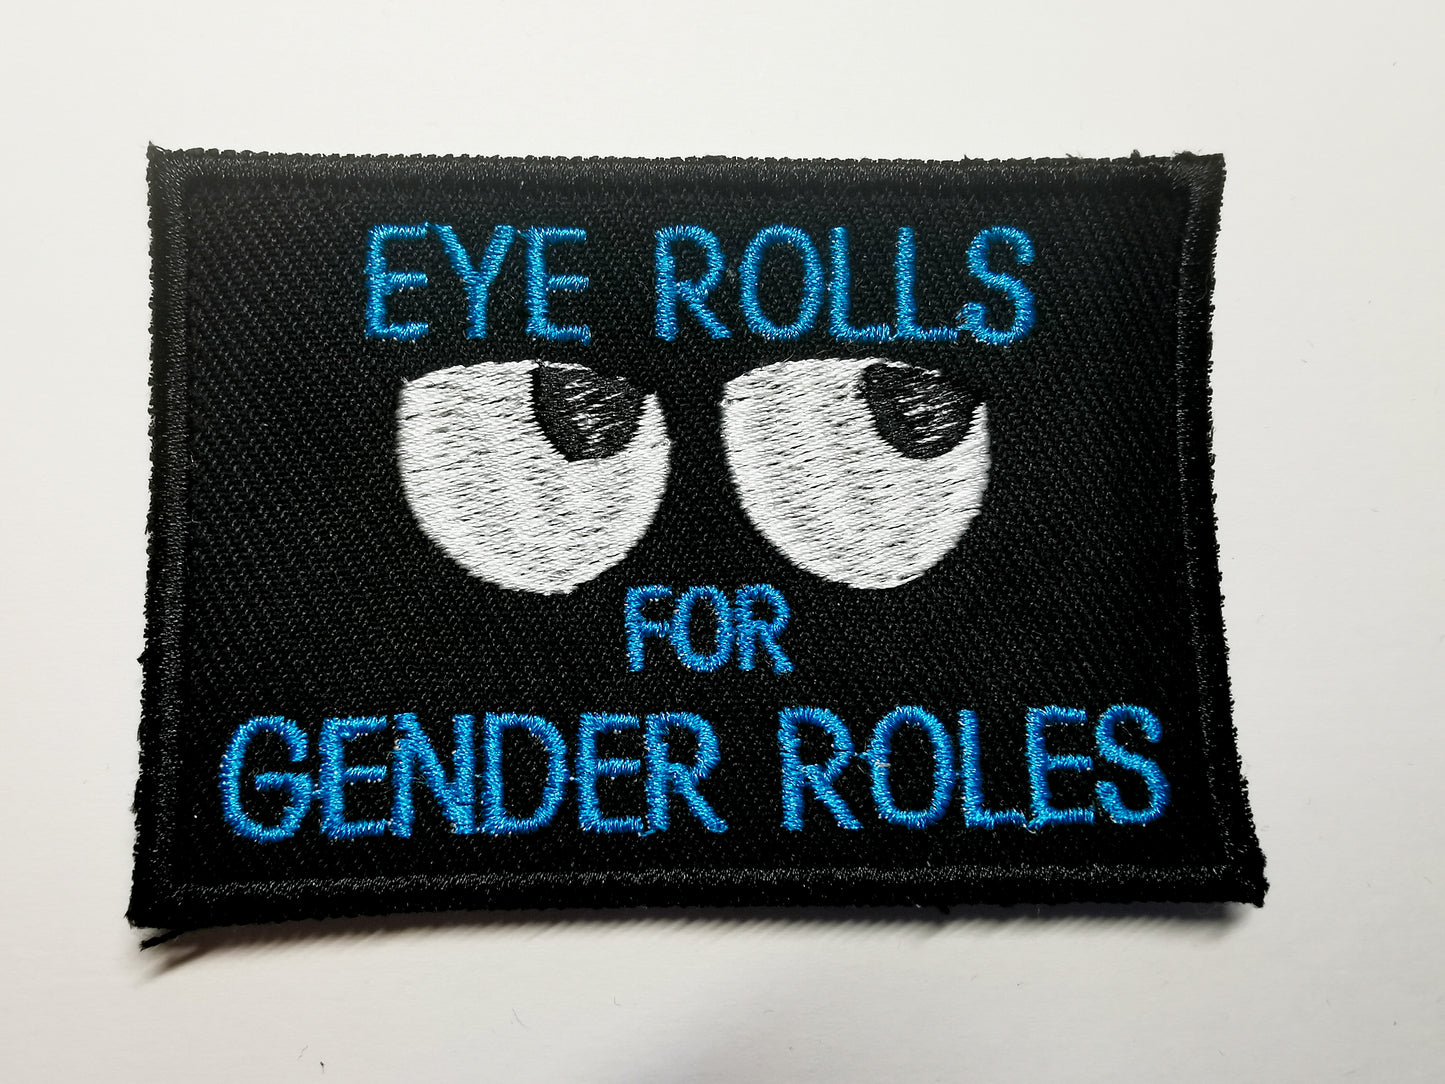 Eye Rolls for Gender Roles Embroidered Patch Square Aqua Blue